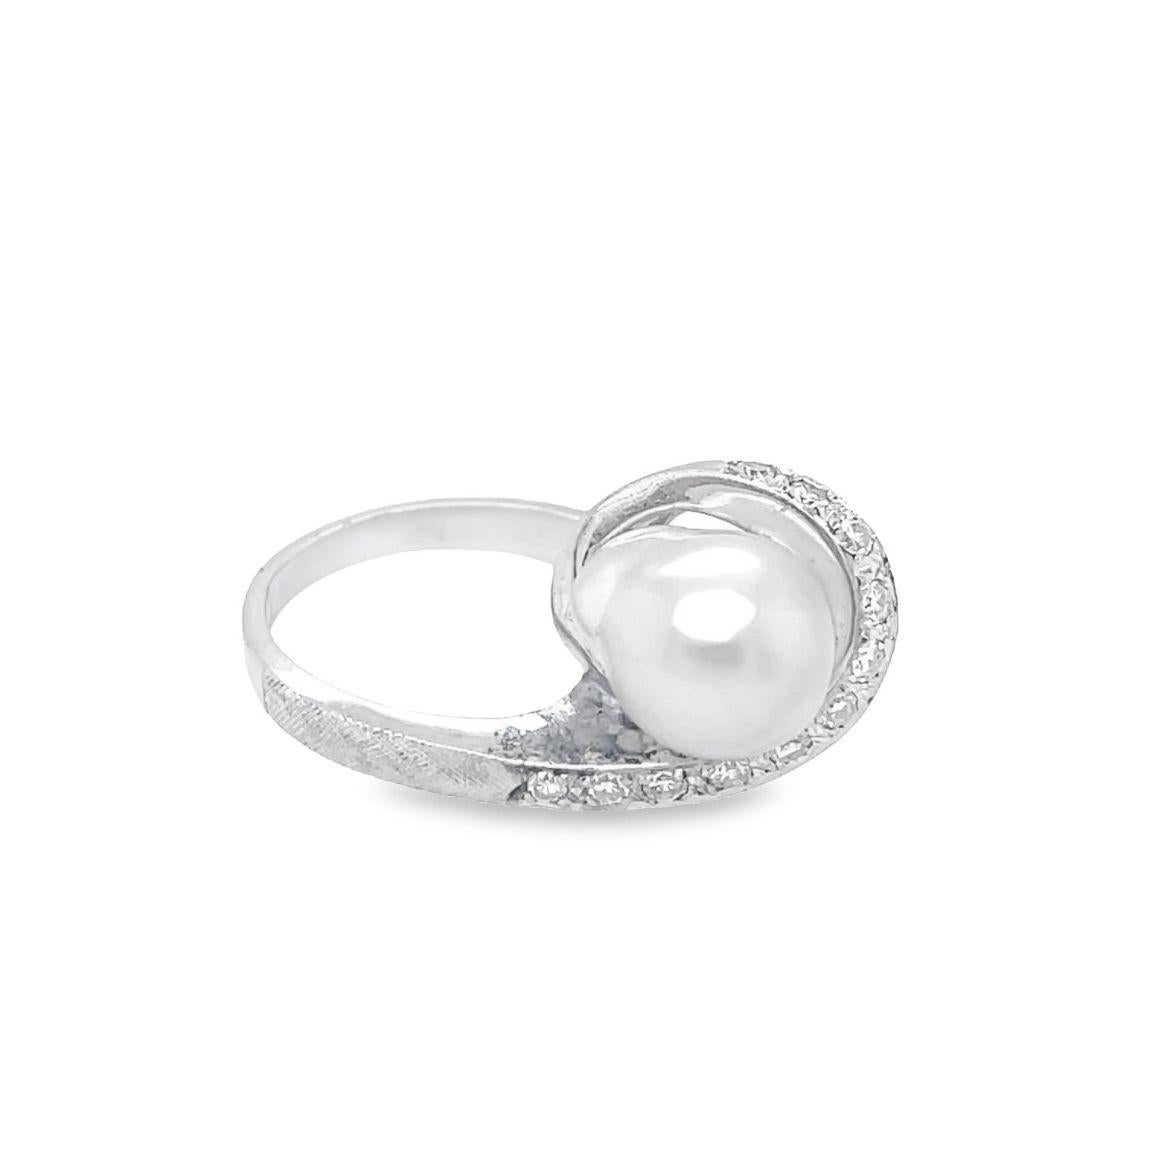 Swirl Diamond and Baroque Akoya Pearl Ring in 14k White Gold In Good Condition For Sale In beverly hills, CA